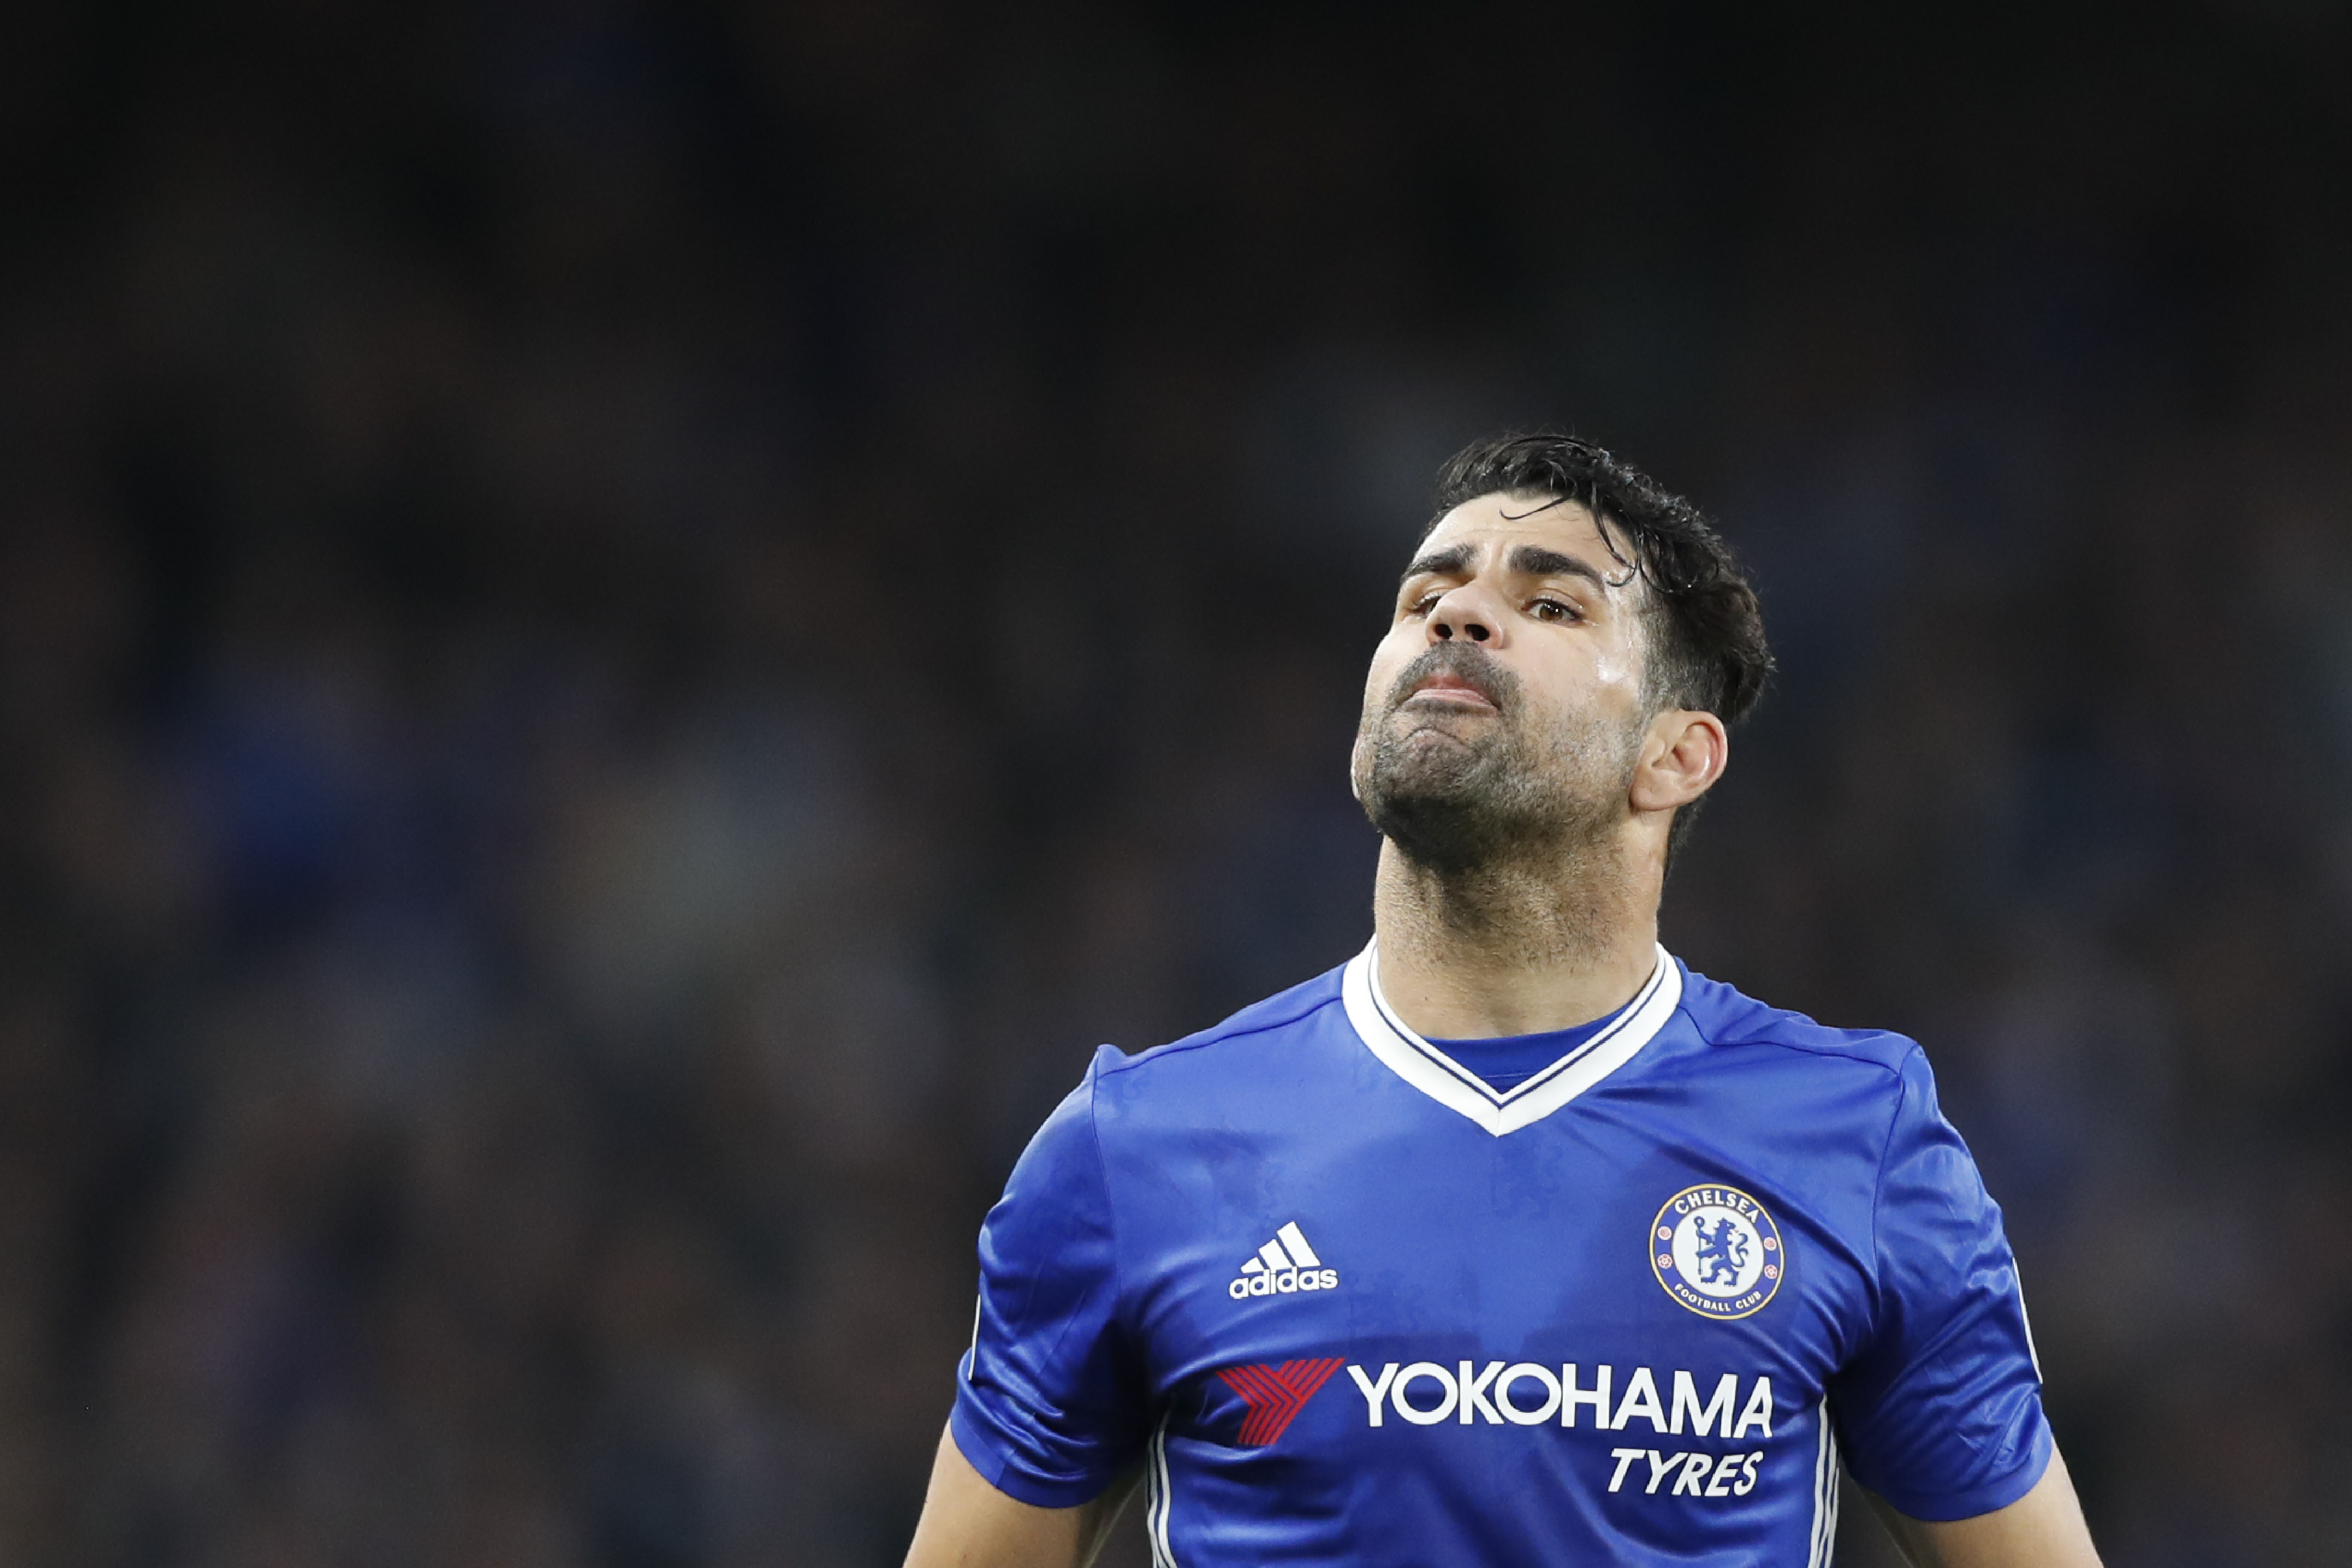 Chelsea's Brazilian-born Spanish striker Diego Costa gestures during the English Premier League football match between Chelsea and Middlesbrough at Stamford Bridge in London on May 8, 2017. / AFP PHOTO / Adrian DENNIS / RESTRICTED TO EDITORIAL USE. No use with unauthorized audio, video, data, fixture lists, club/league logos or 'live' services. Online in-match use limited to 75 images, no video emulation. No use in betting, games or single club/league/player publications.  /         (Photo credit should read ADRIAN DENNIS/AFP/Getty Images)